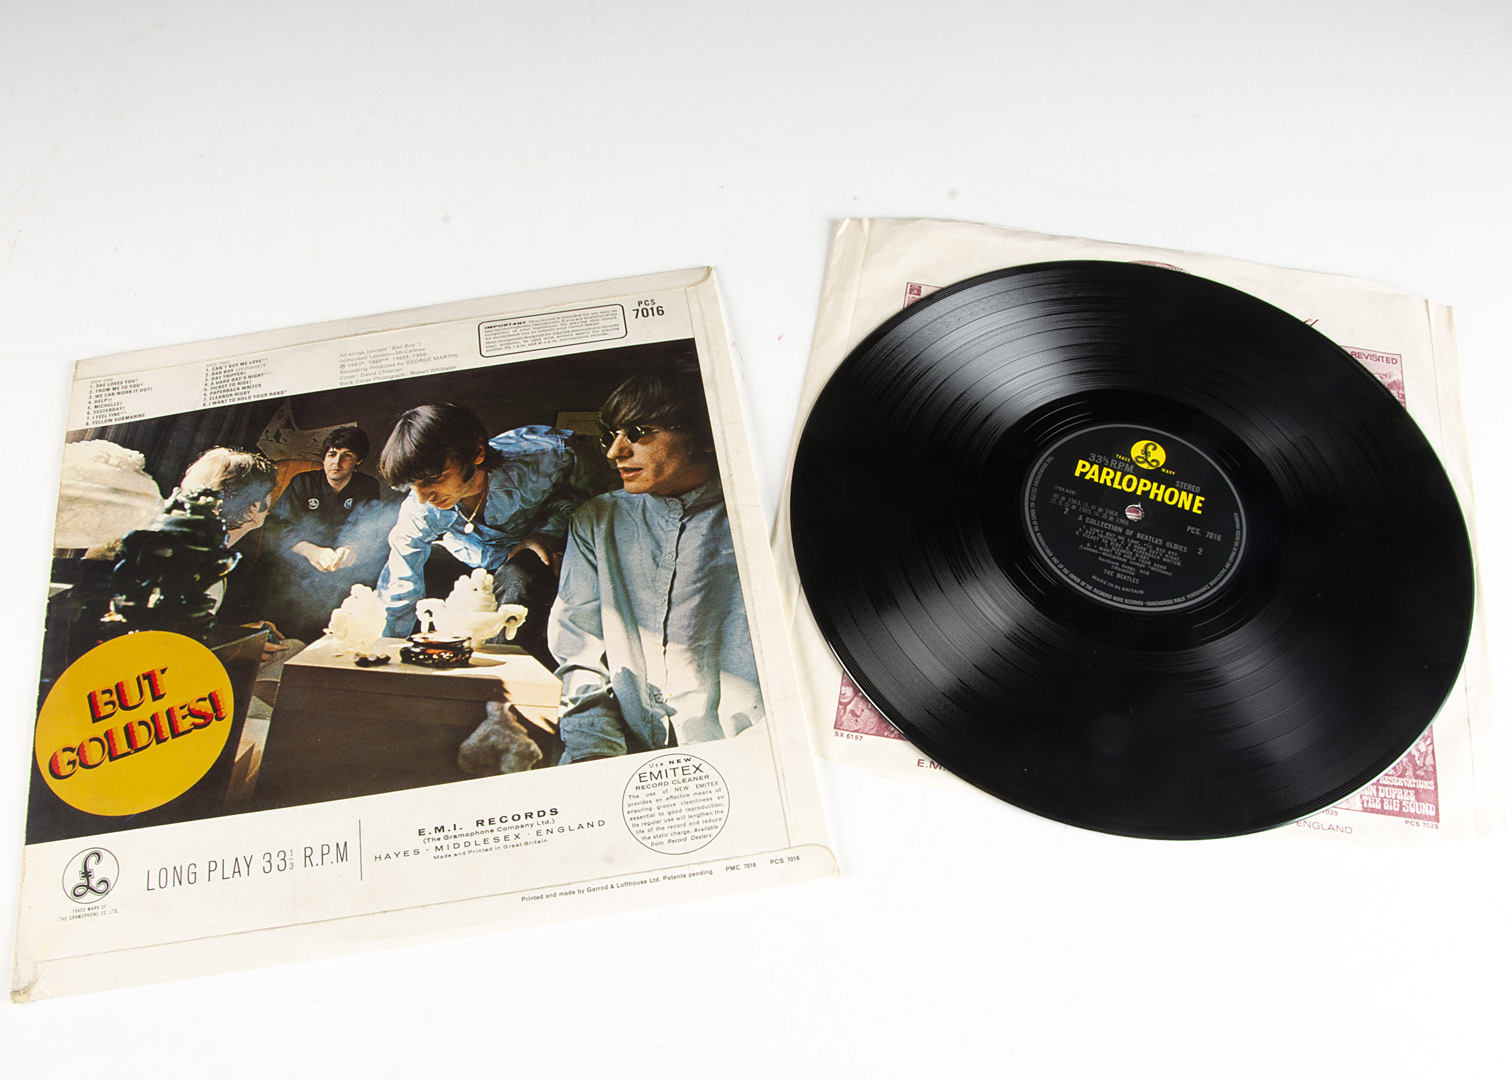 The Beatles LP, A Collection of Beatles Oldies - Original UK Stereo release 1966 on Parlophone ( - Image 2 of 2